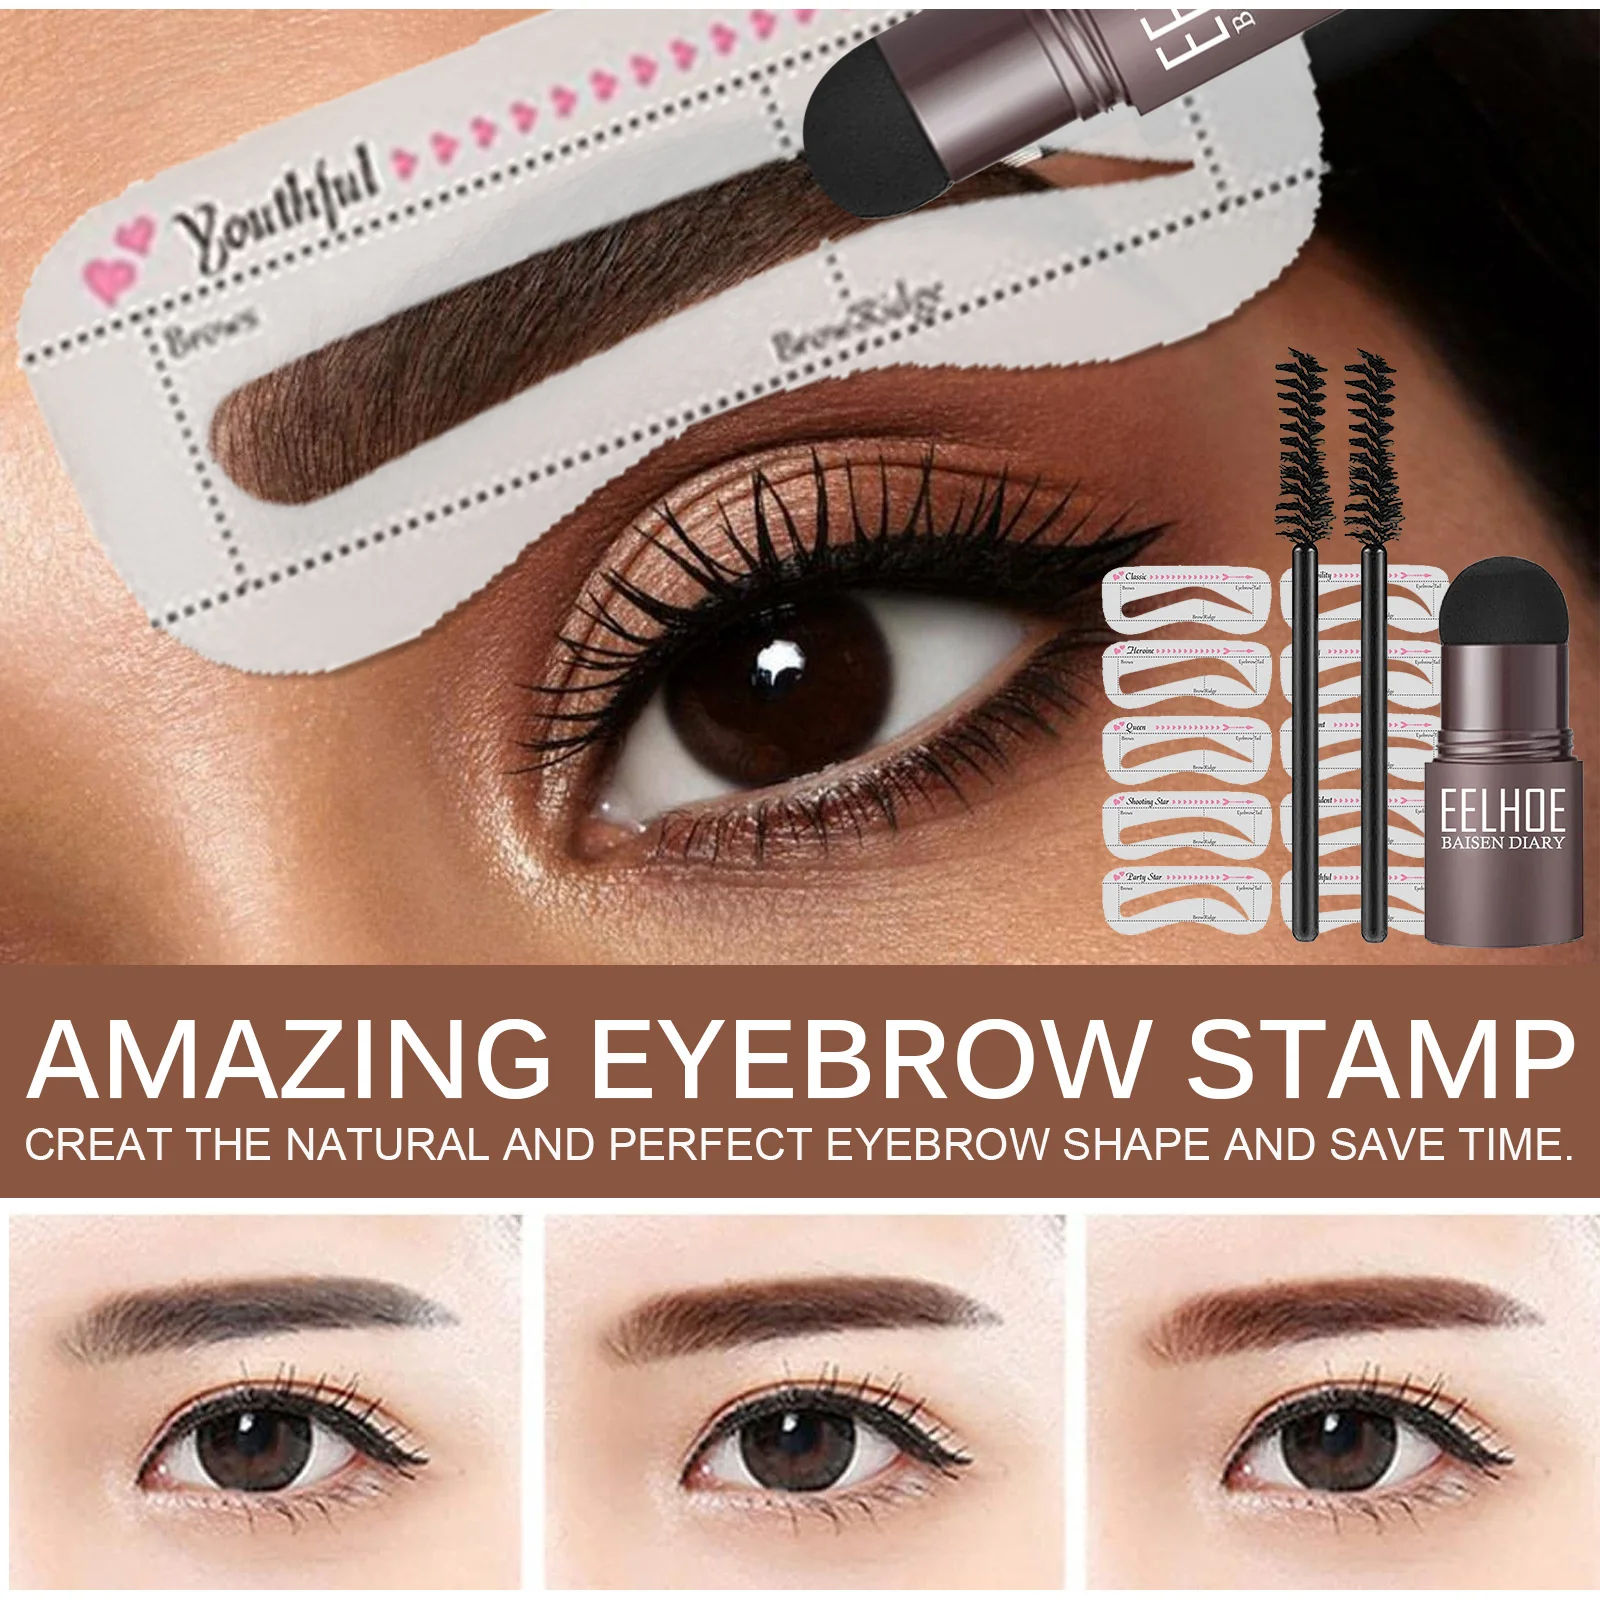 

One Step Eyebrow Stamp Shaping Kit Makeup Waterproof Sweatproof Contour Stencil Tint Natural Stick Hairline Contouring Powder